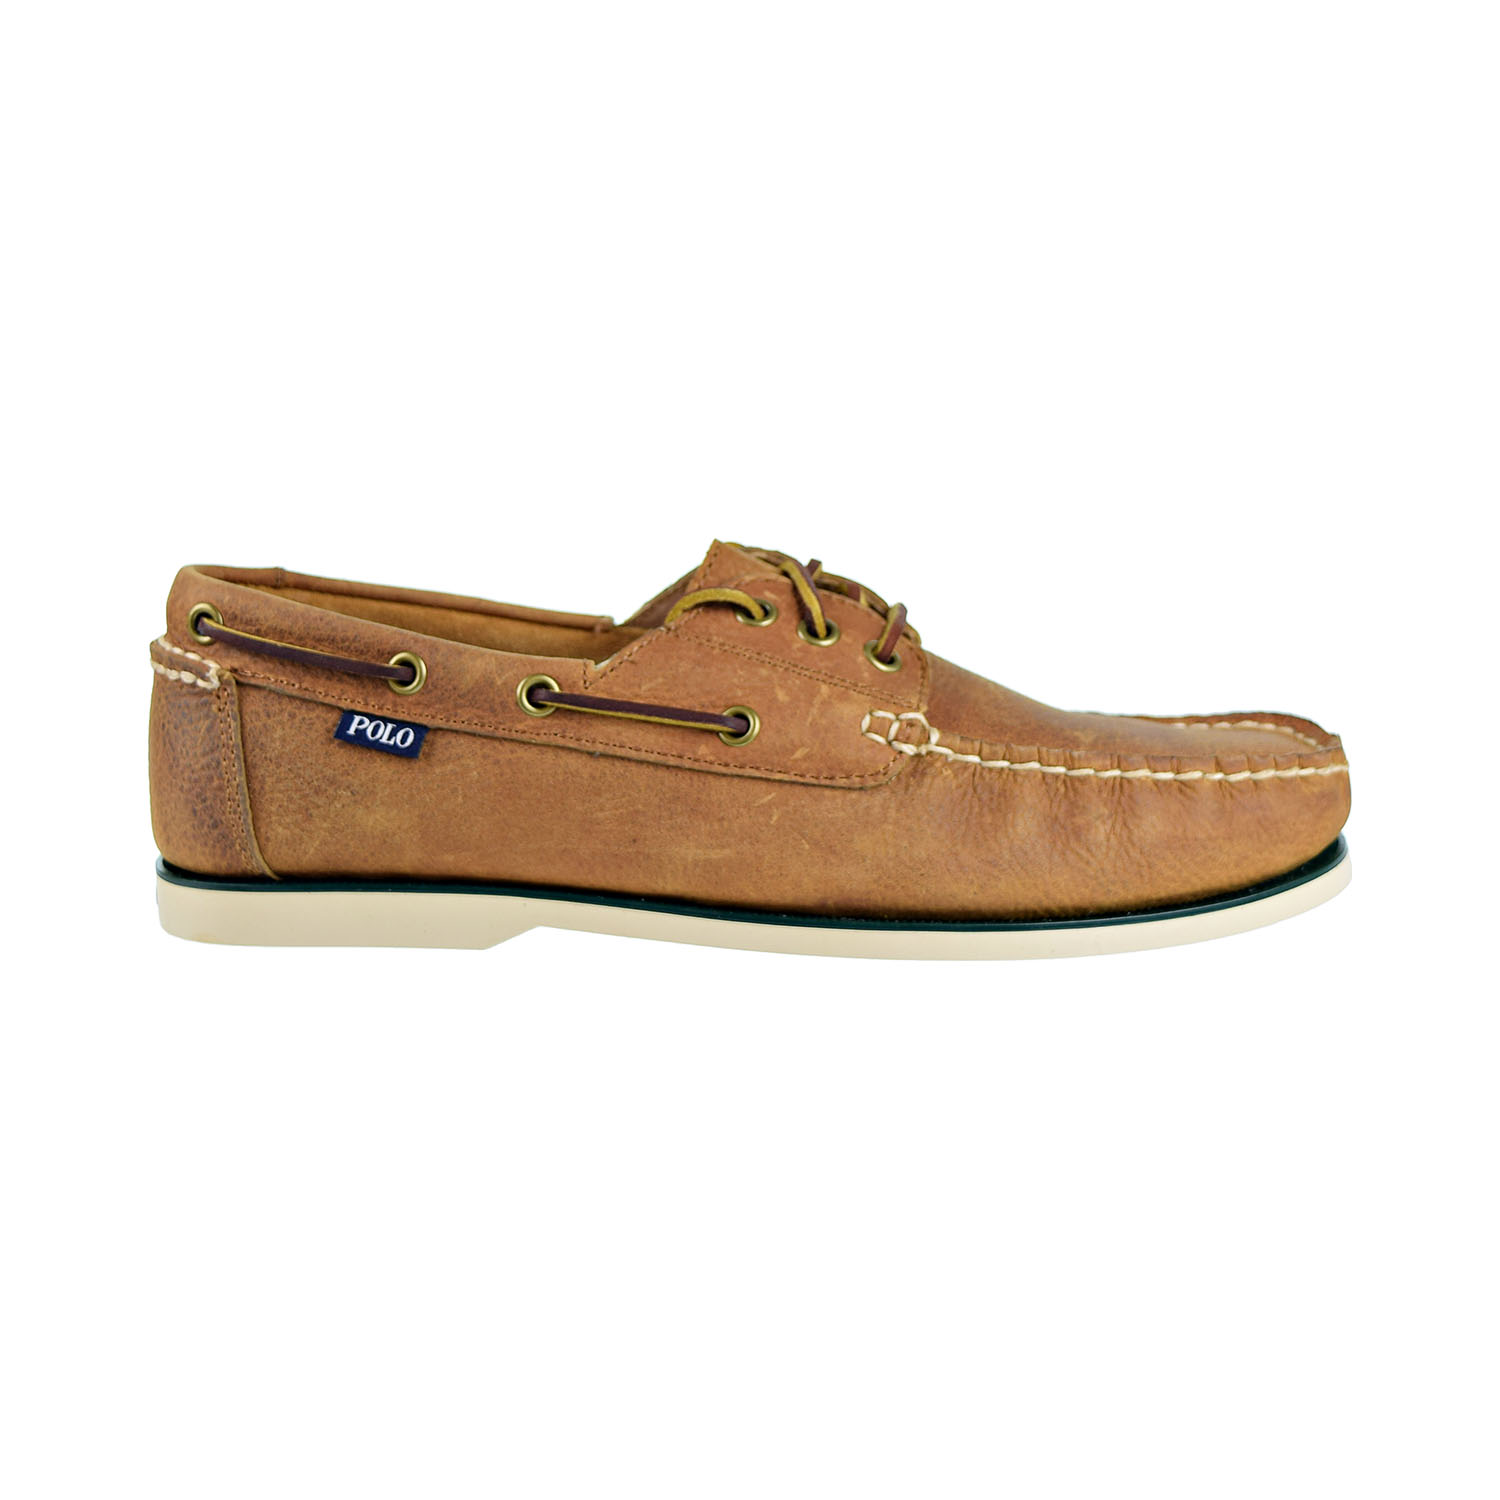 polo boat shoes mens